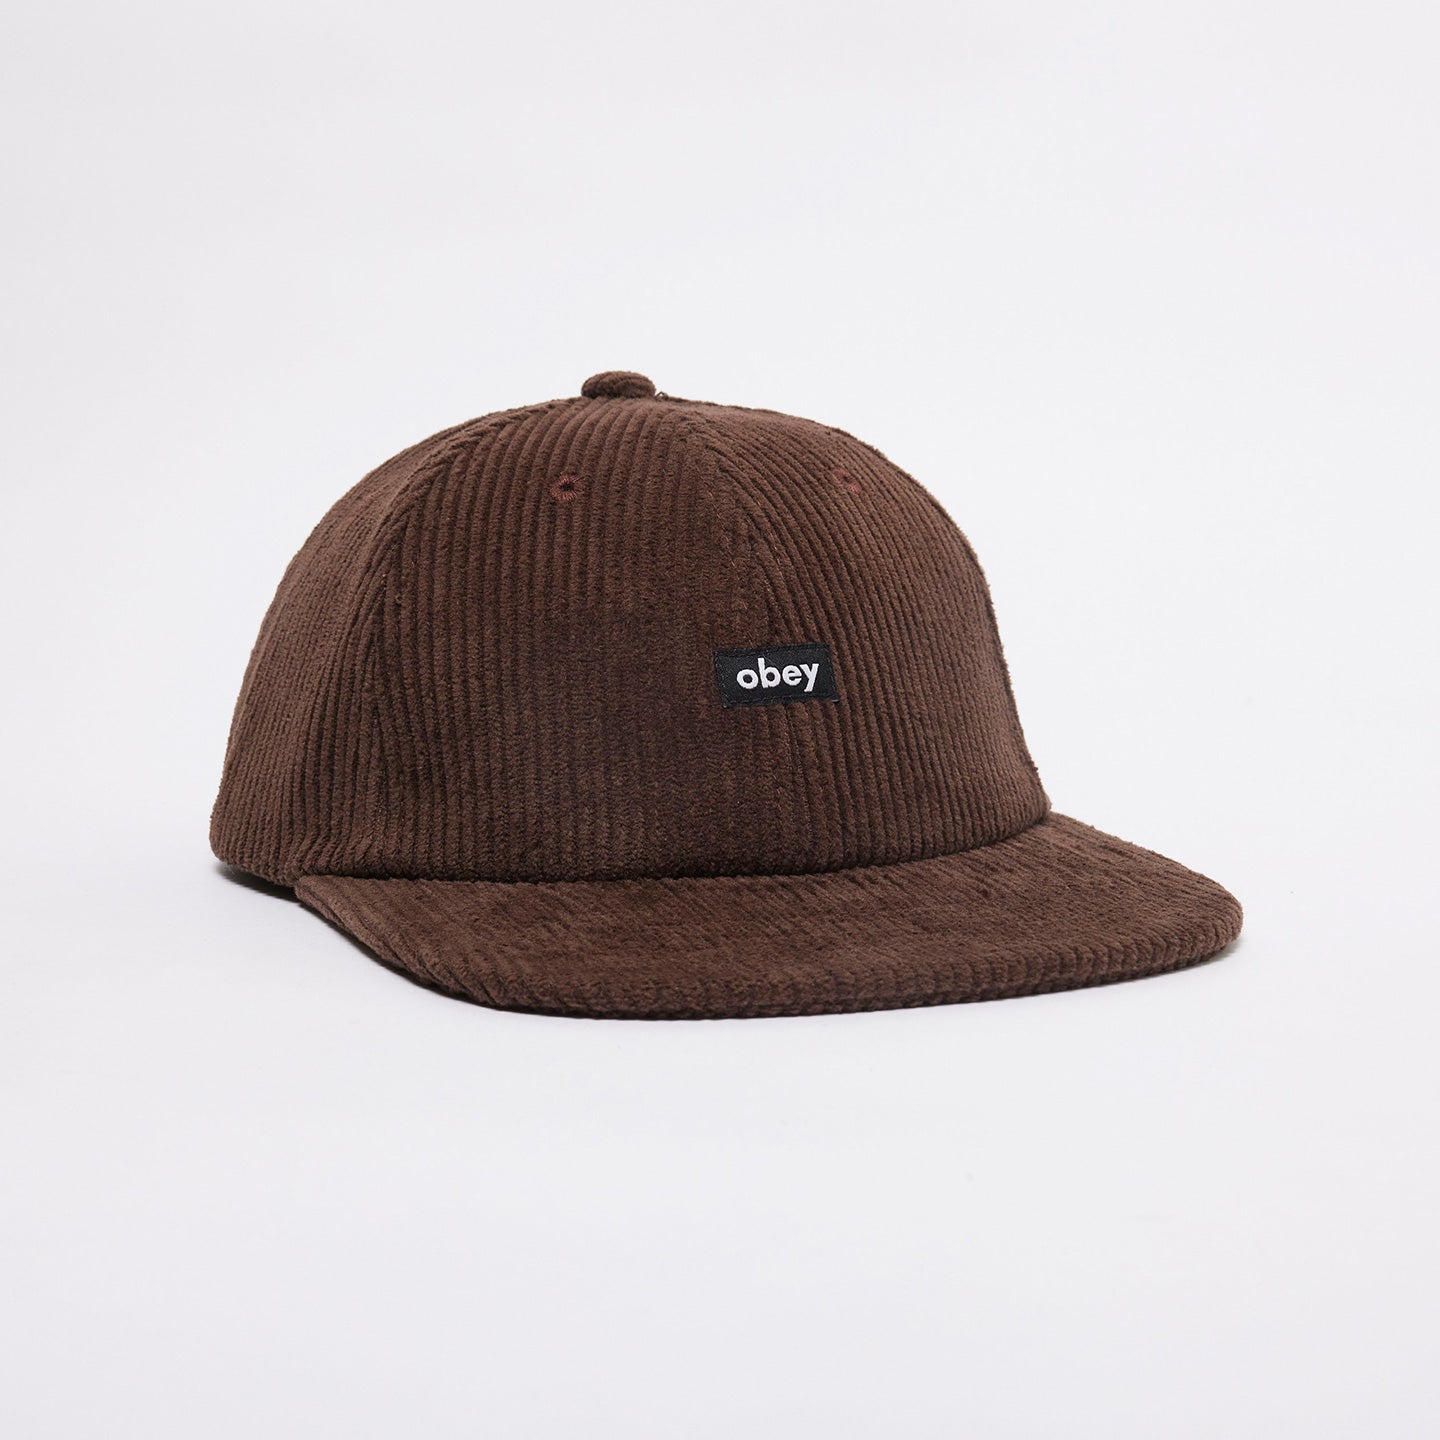 OBEY CORD LABEL 6 PANEL STRAP BROWN